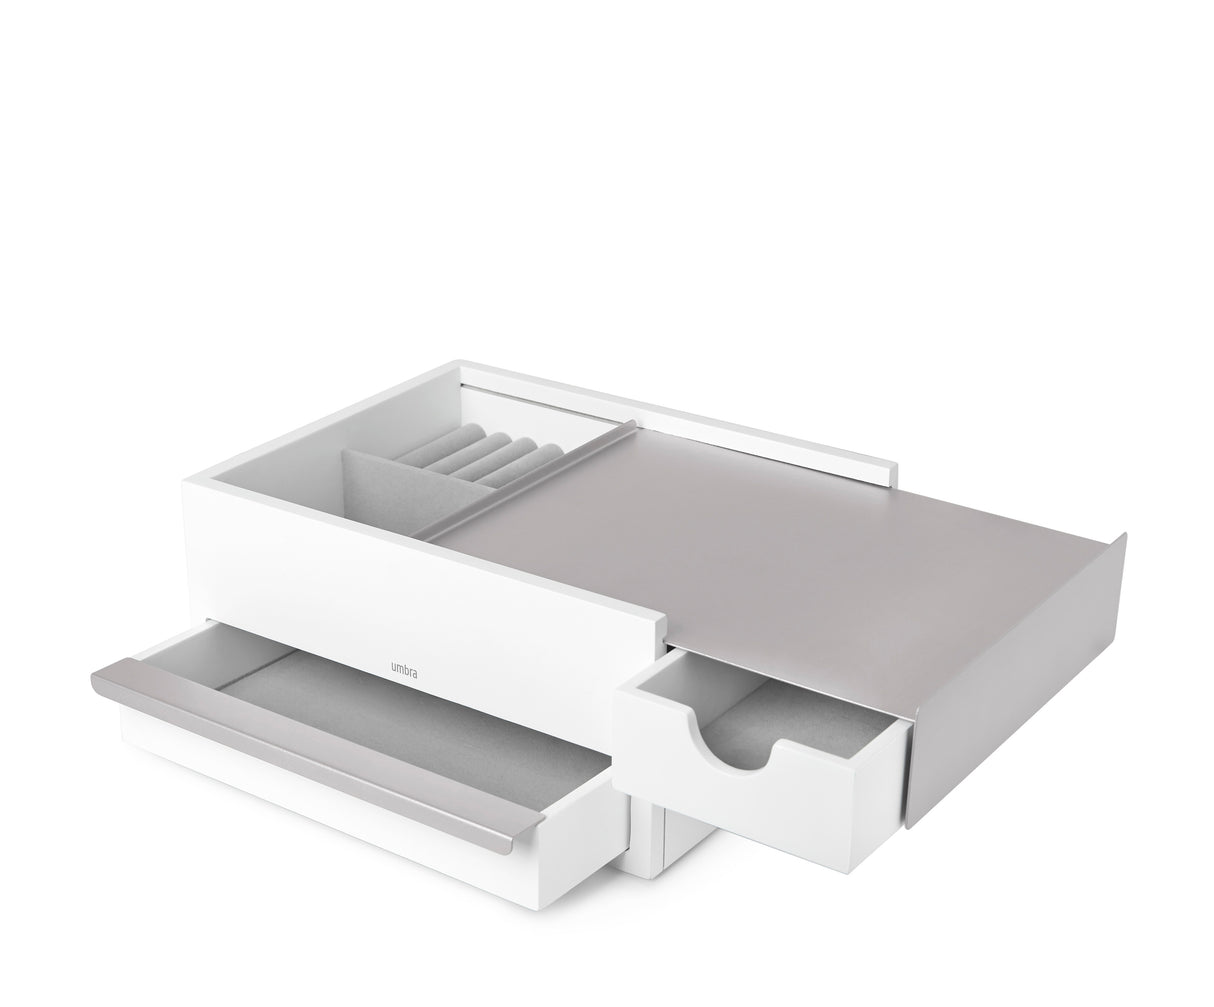 Jewelry Boxes | color: White-Nickel